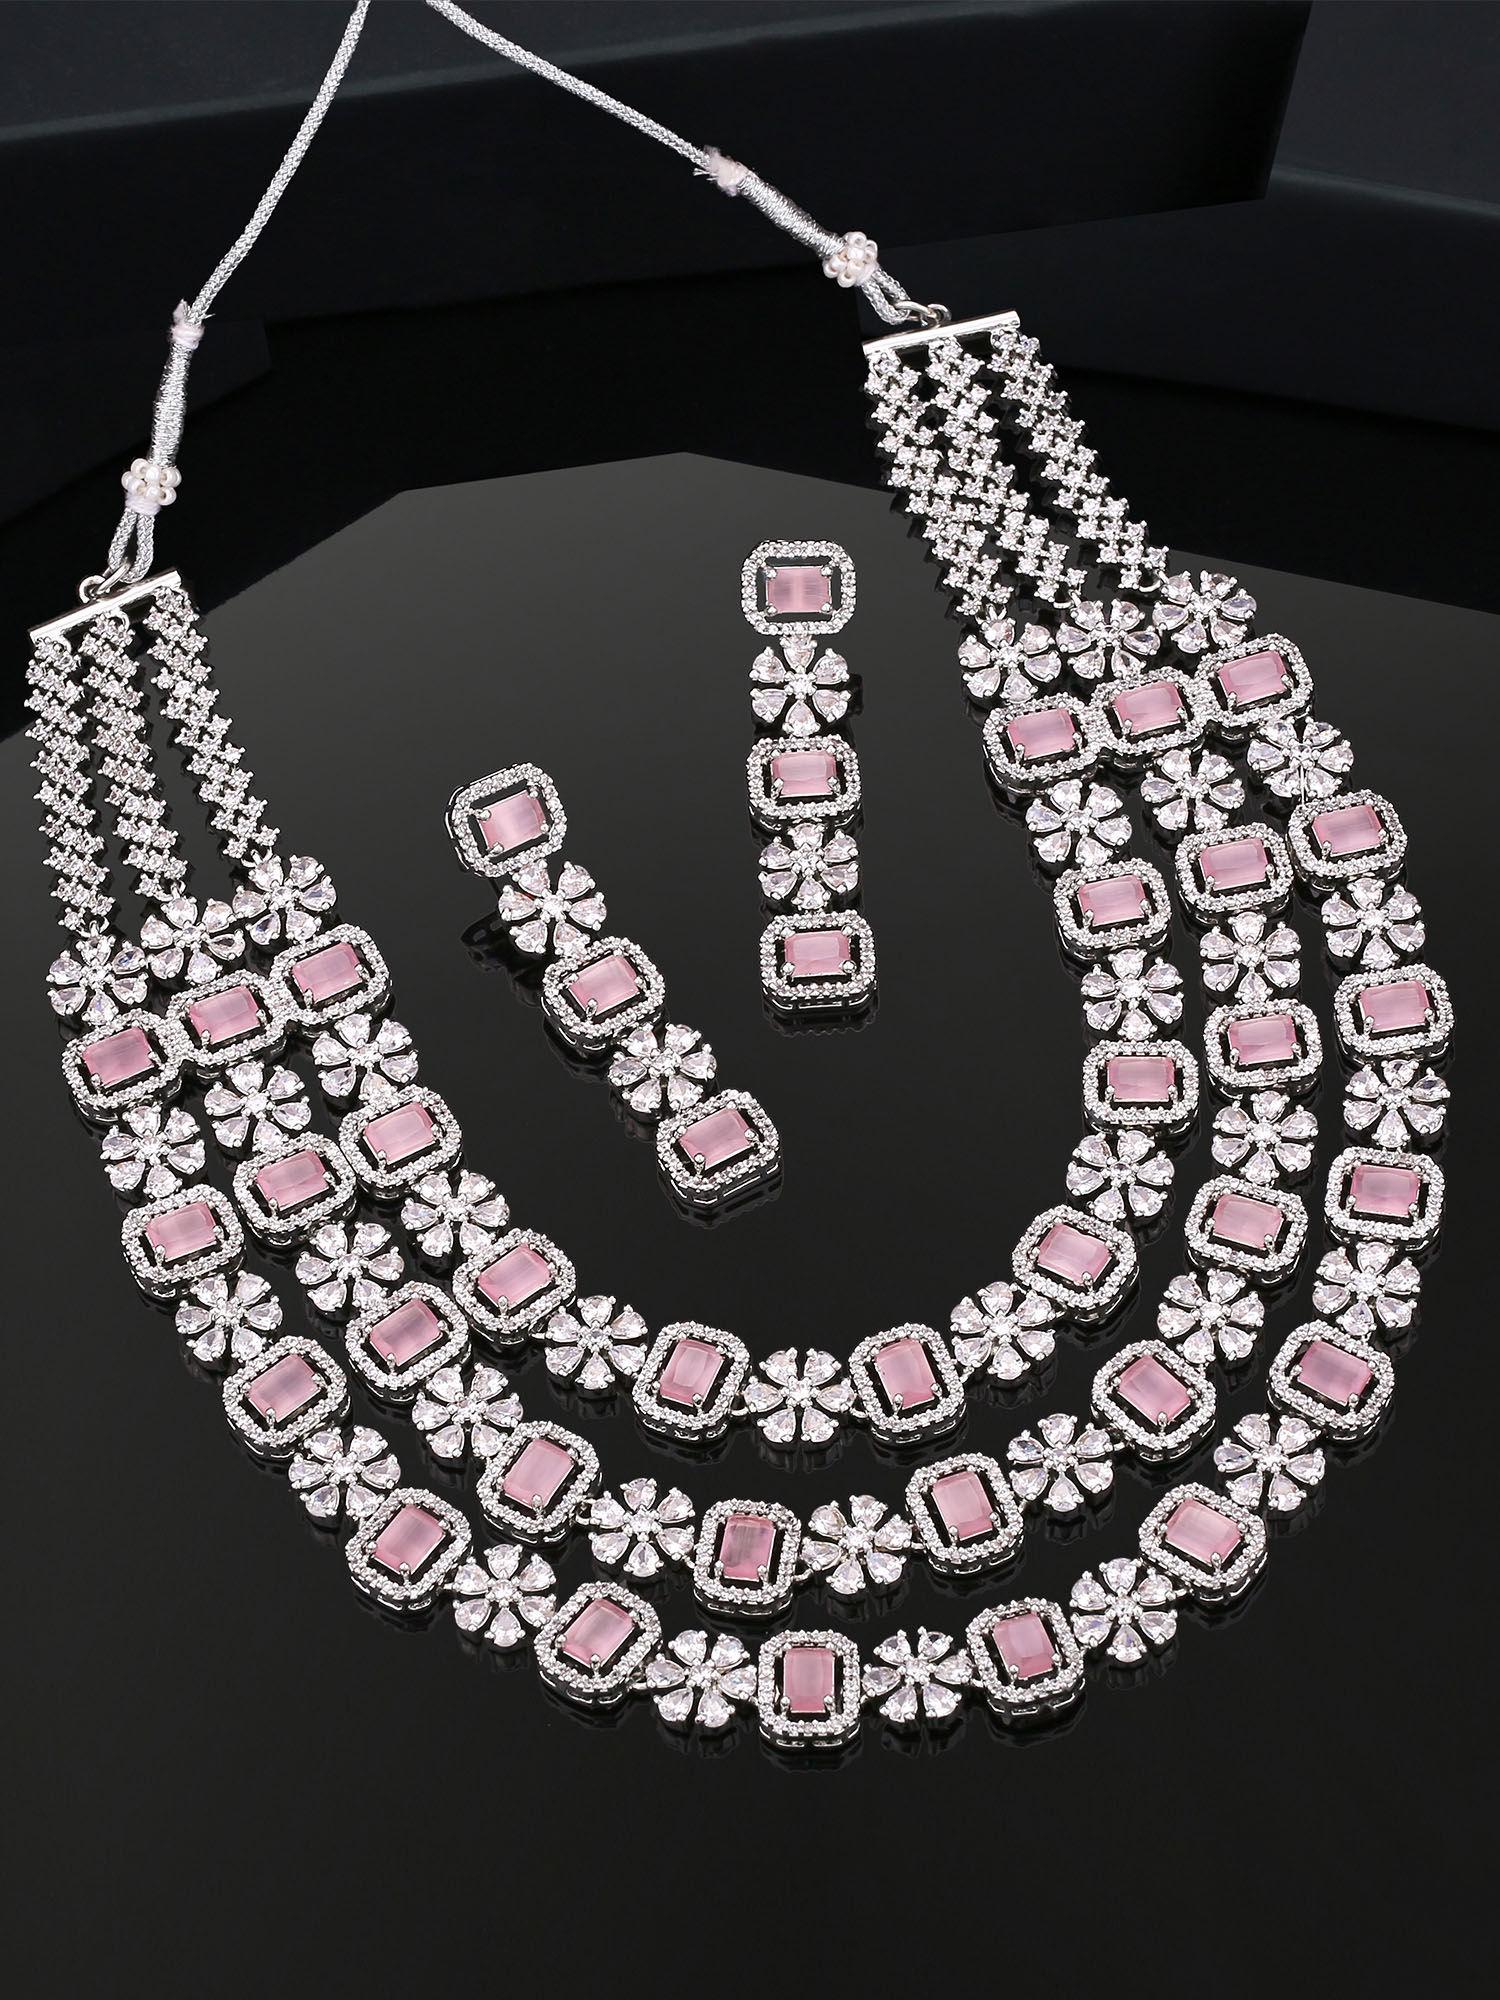 rhodium plated cz fascinating three line necklace set with mint pink stones